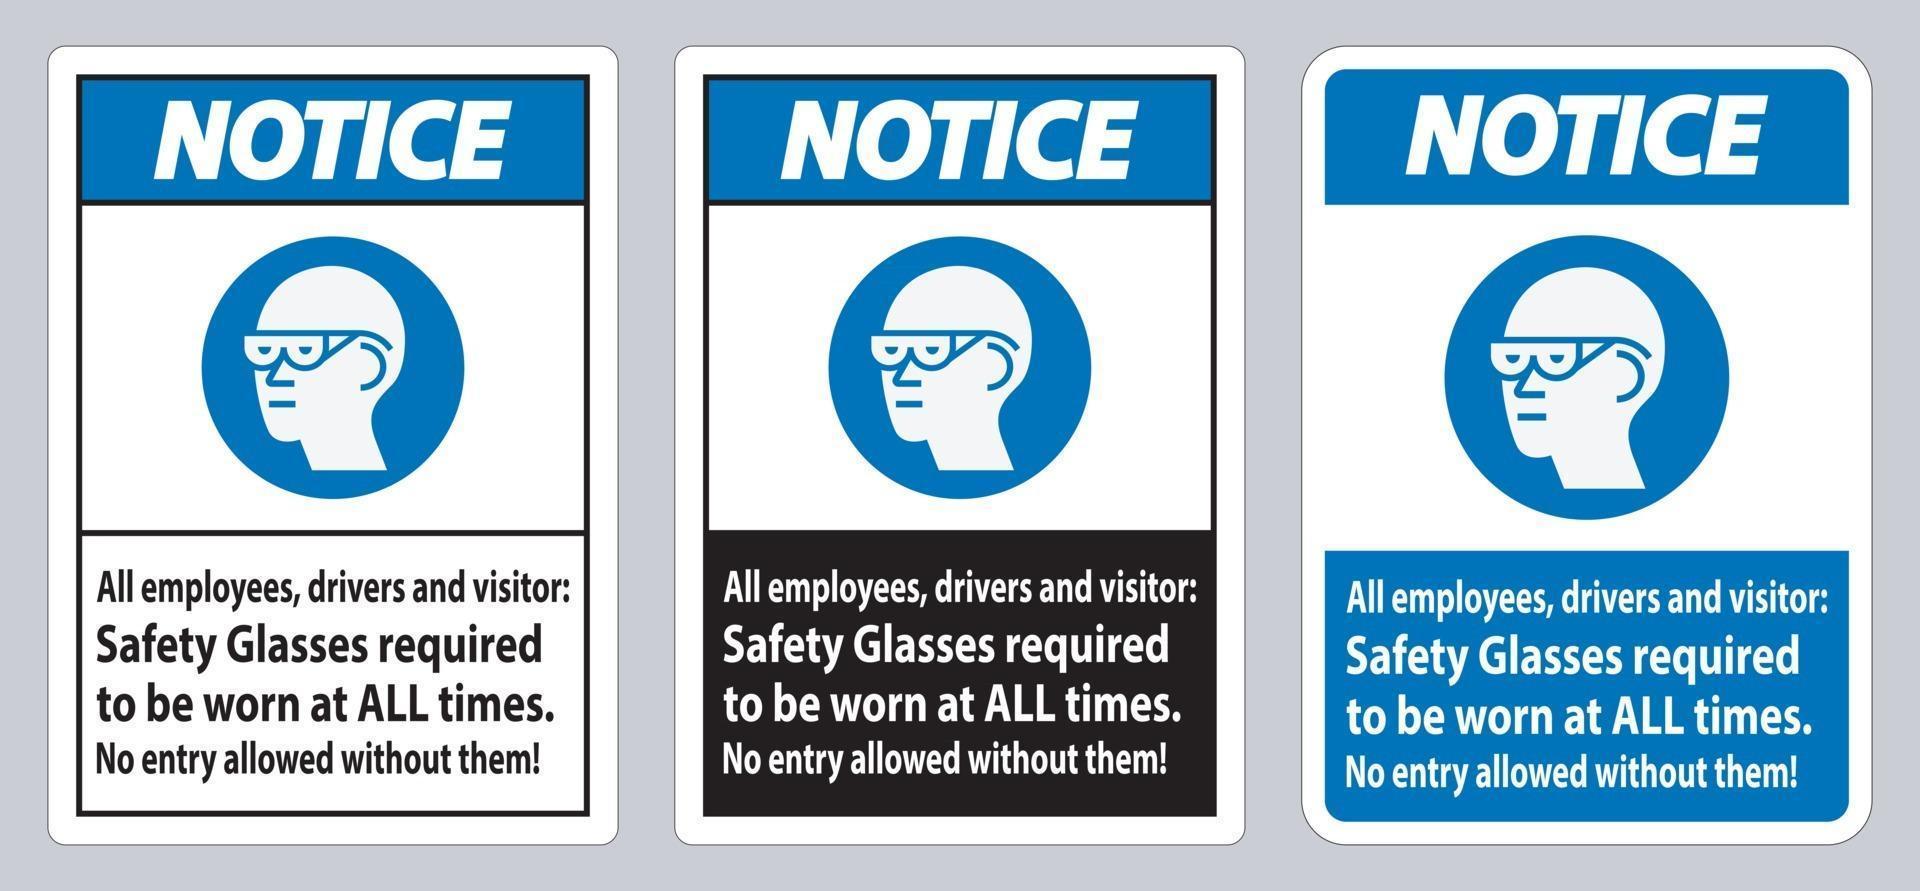 Notice Sign All Employees, Drivers And Visitors,Safety Glasses Required To Be Worn At All Times vector